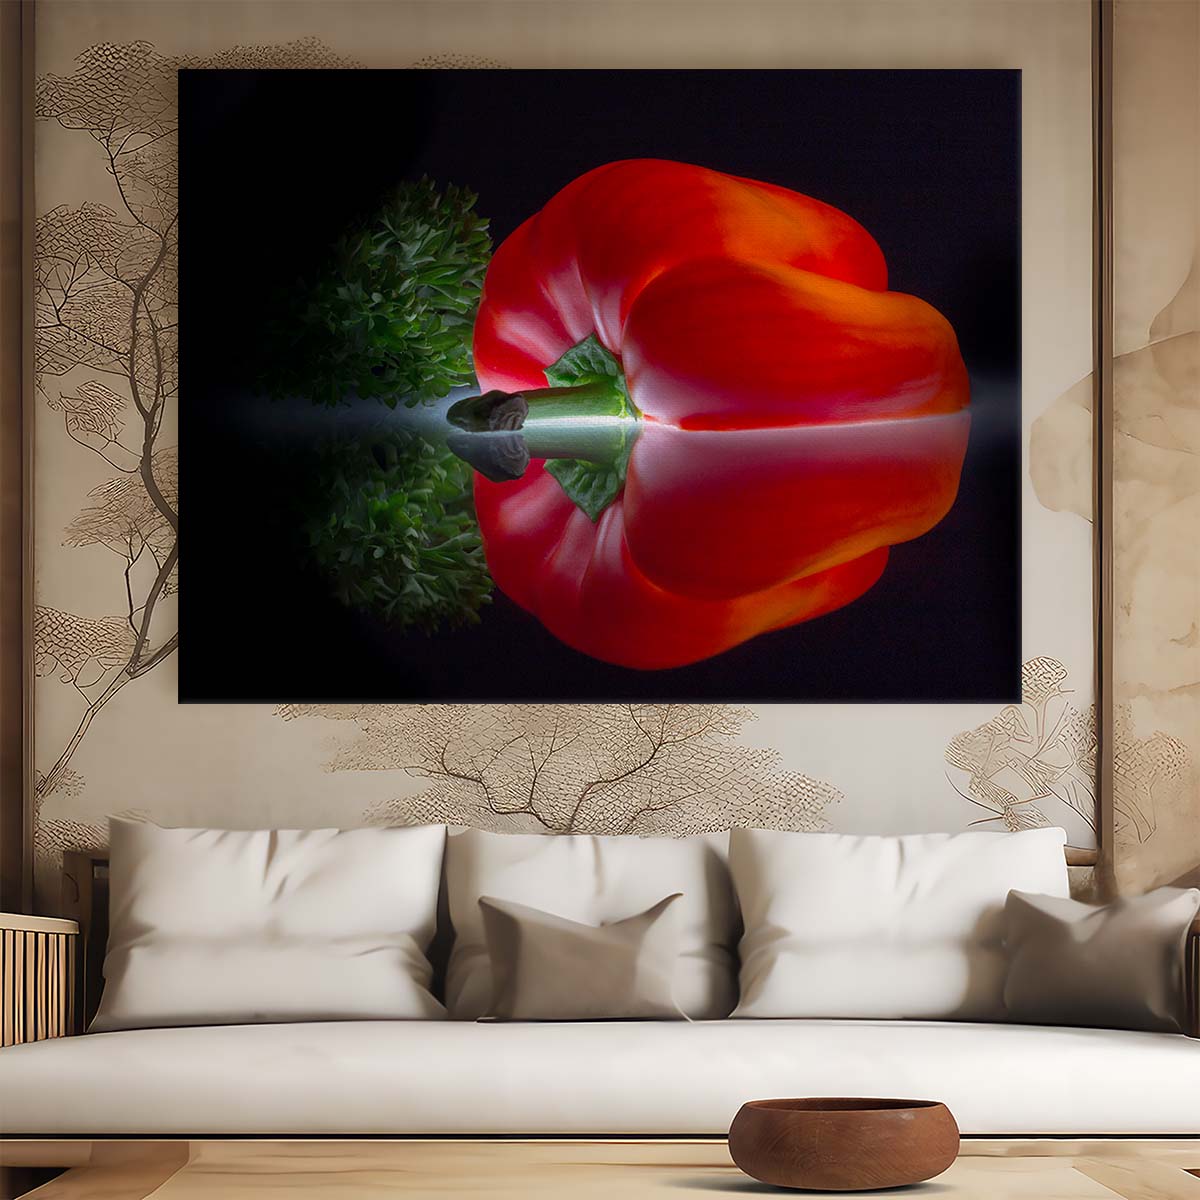 Red Paprika Reflection Kitchen Art Vegetarian Wall Art by Luxuriance Designs. Made in USA.